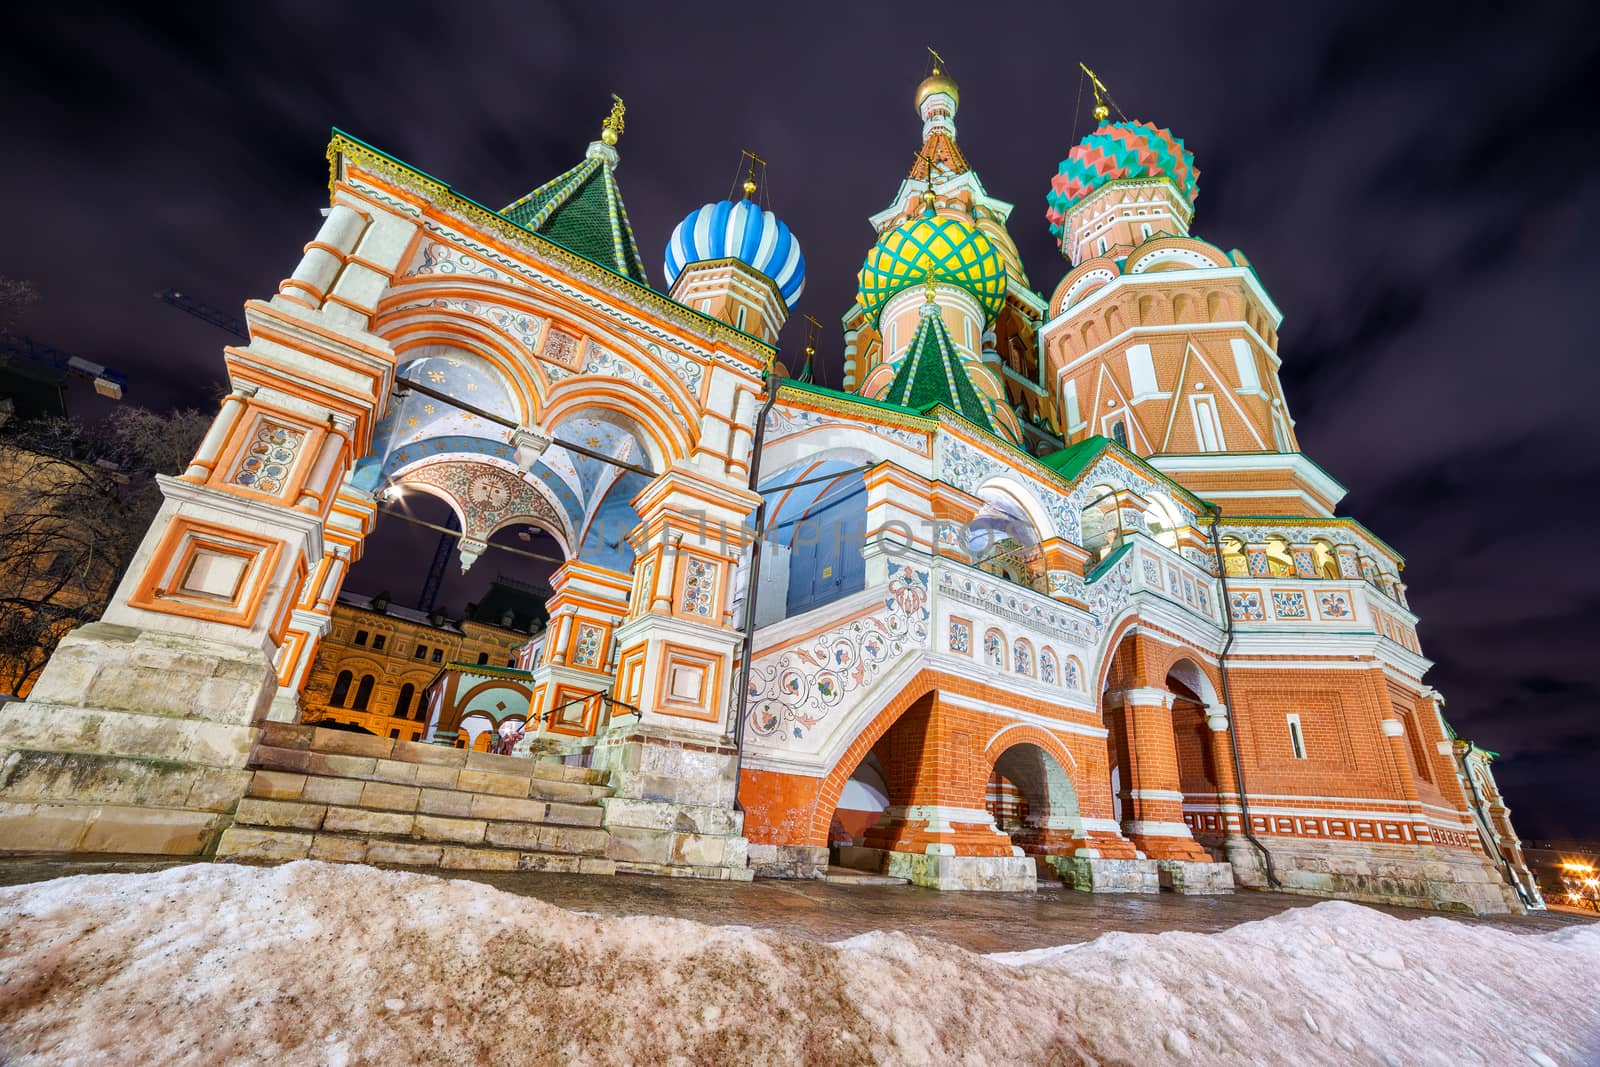 Moscow iconic landmark - Saint Basil cathedral in the Red Square, by night, during winter